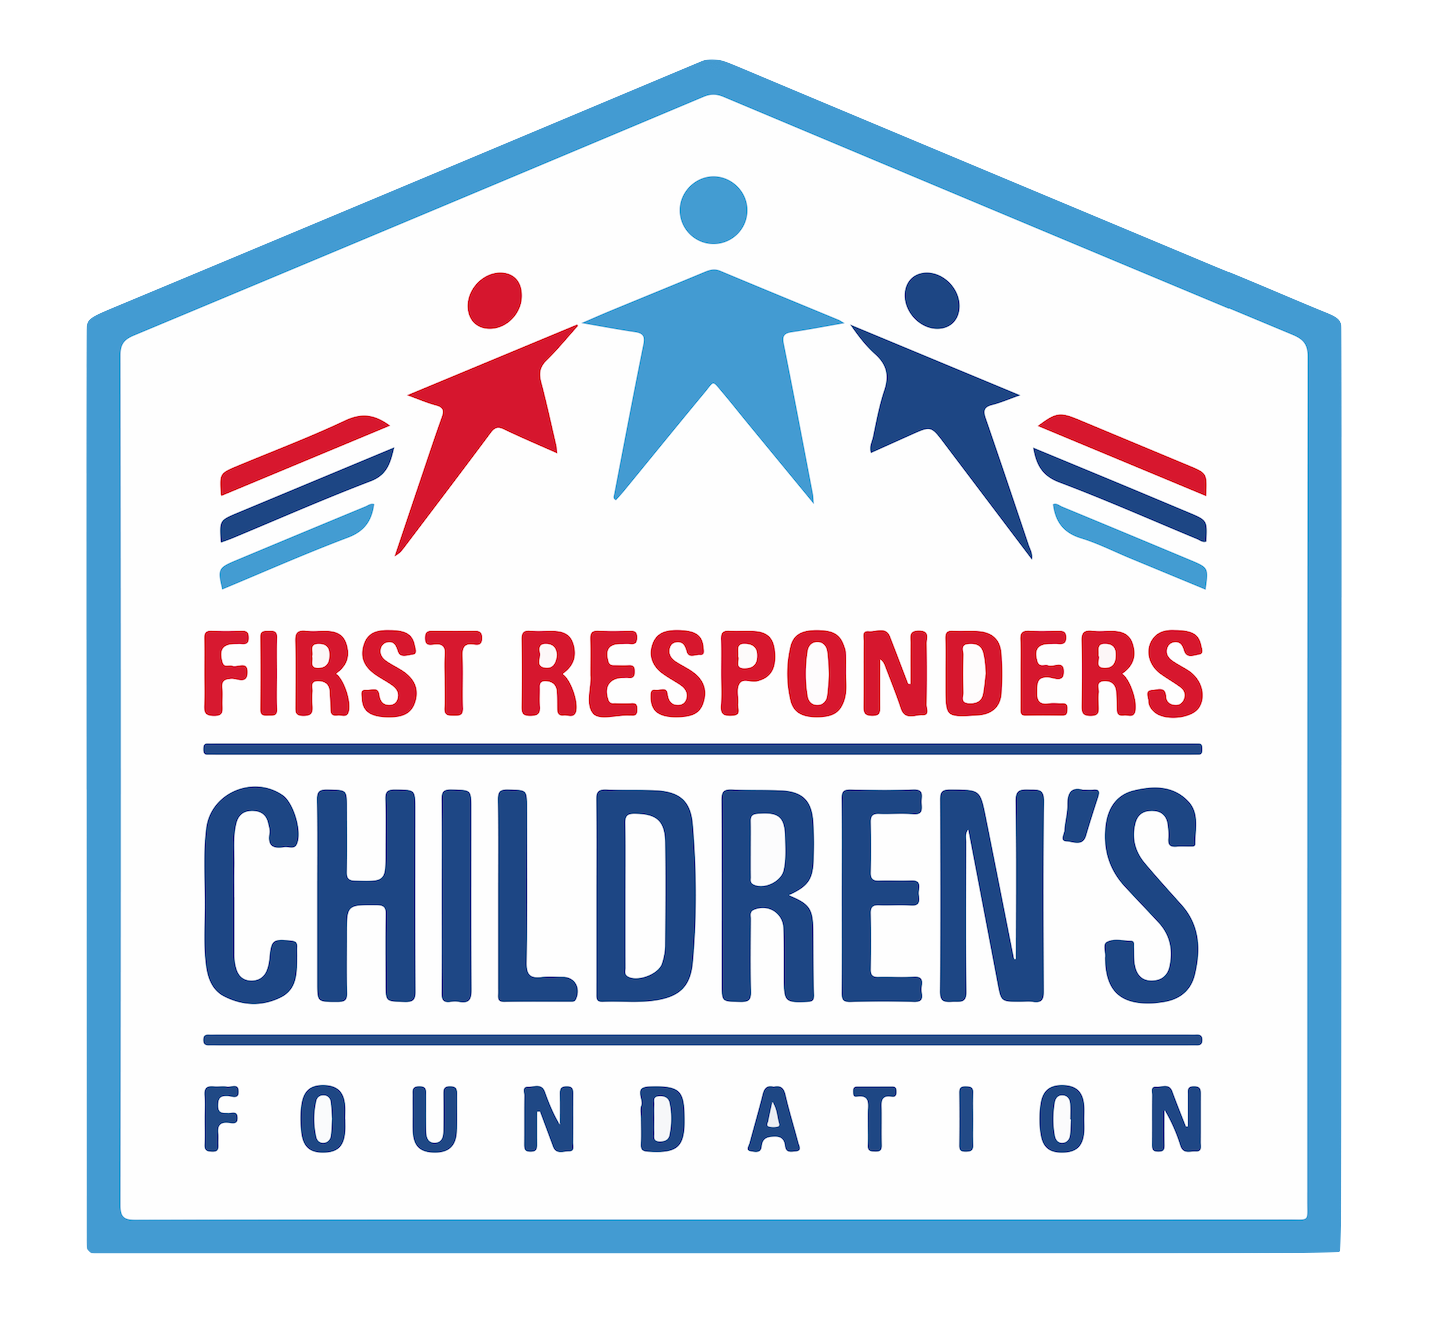 First Responders Children’s Foundation announces mental & behavioral health program for first responders & their families